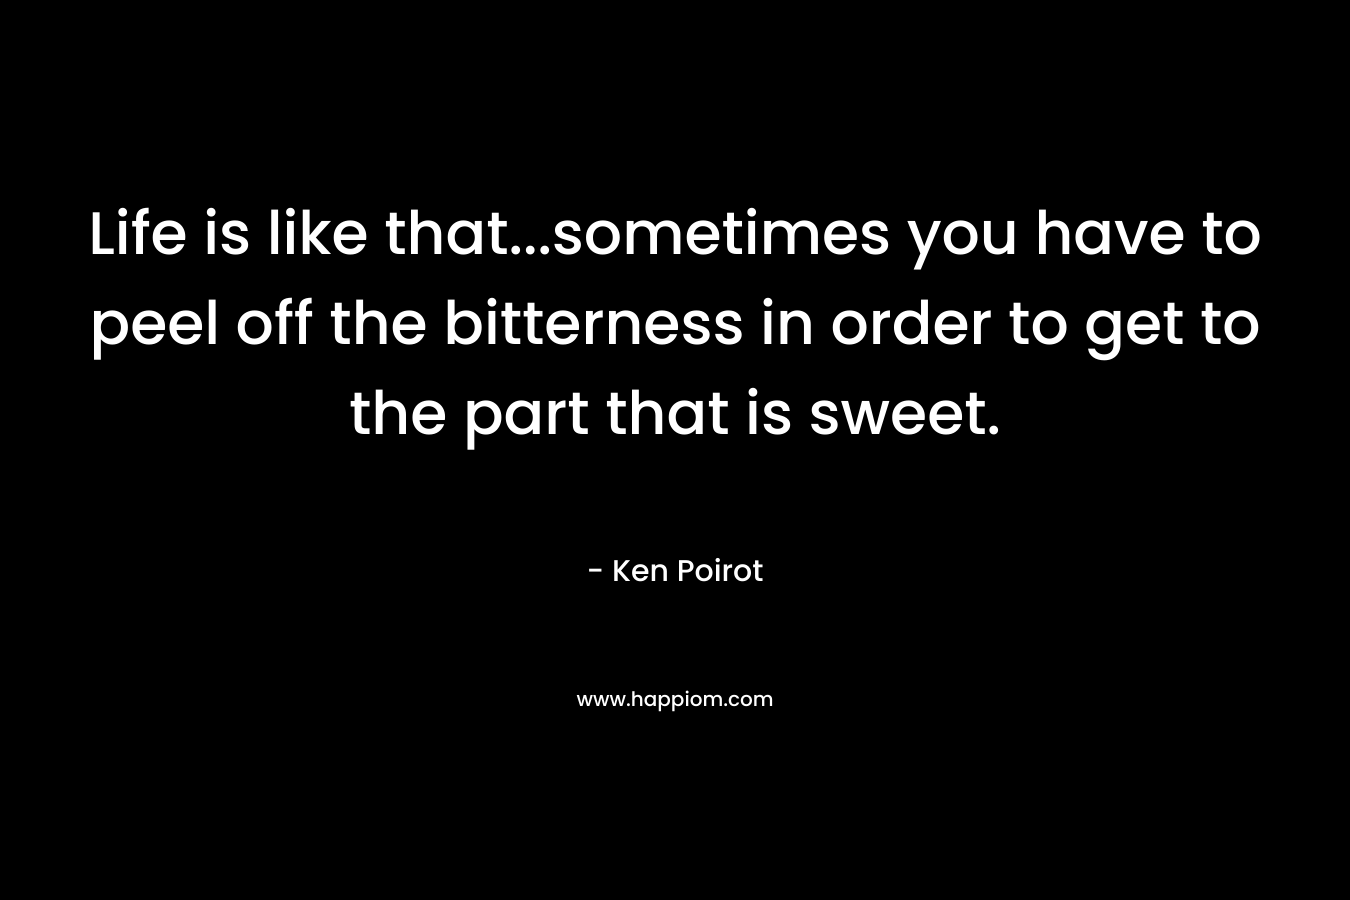 Life is like that…sometimes you have to peel off the bitterness in order to get to the part that is sweet. – Ken Poirot